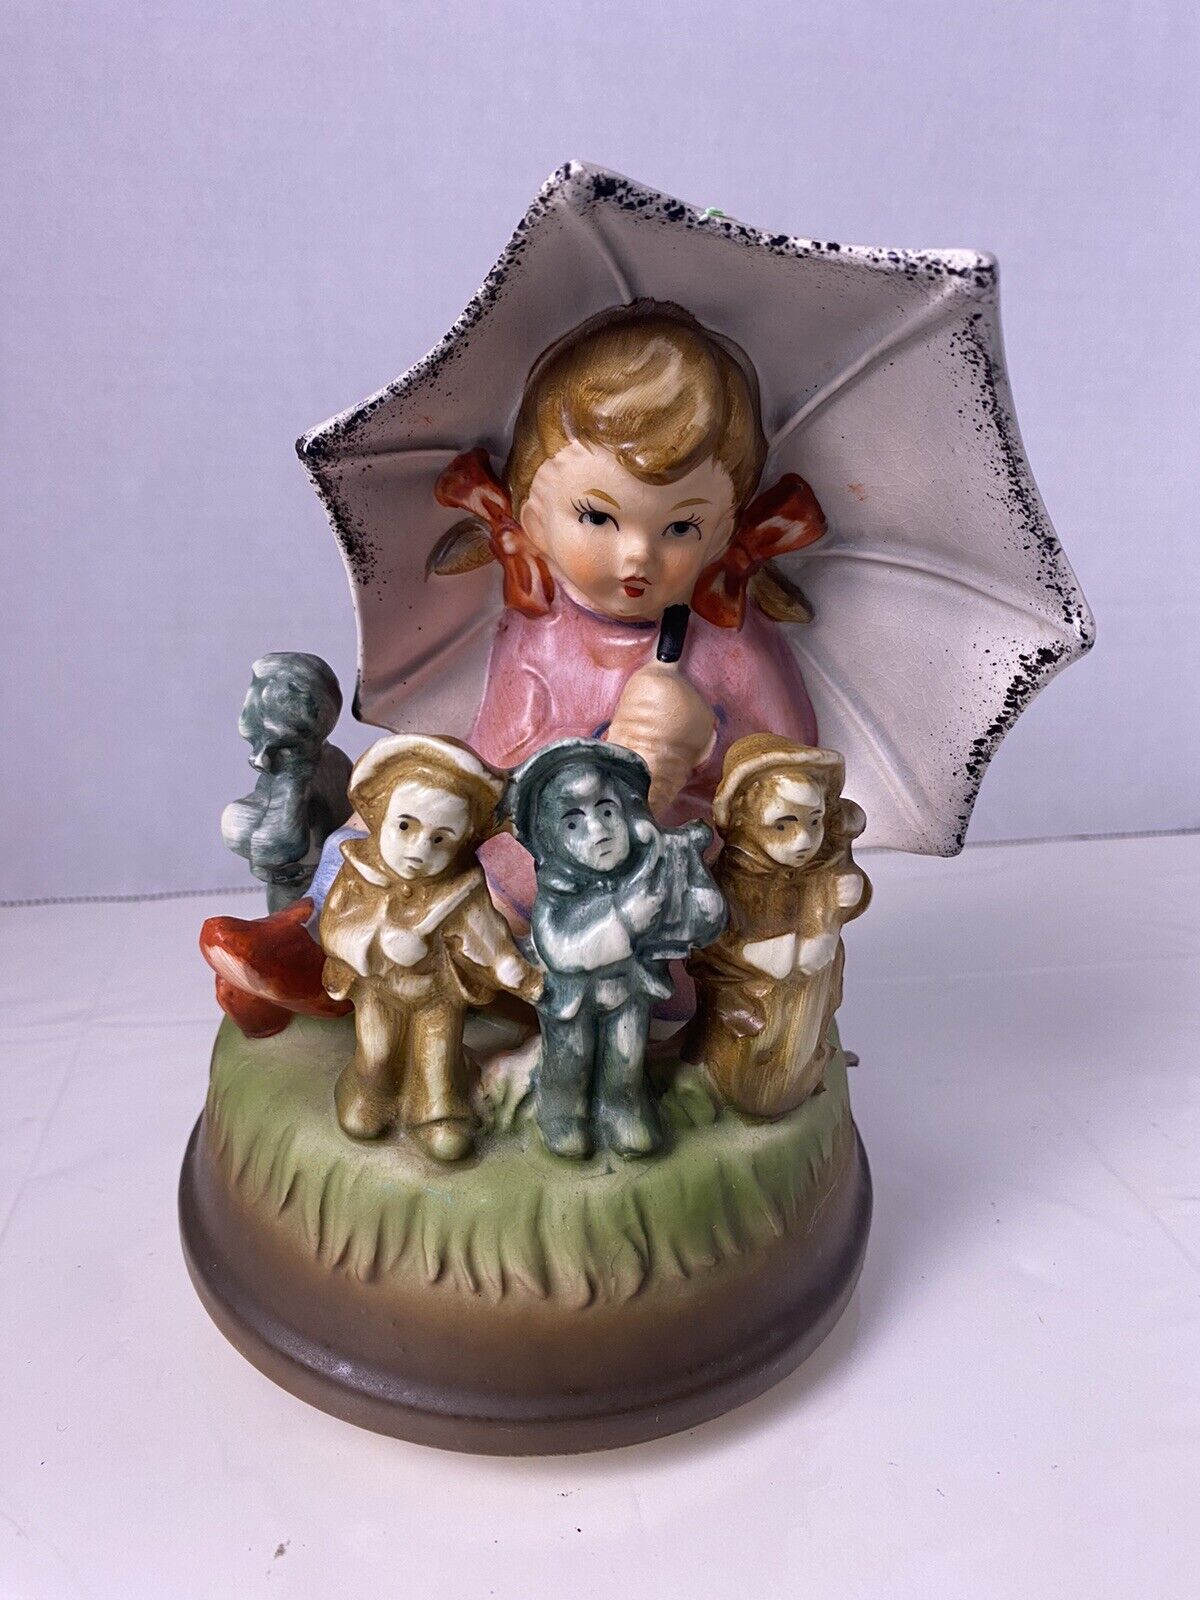 Vintage Music Box Girl Under Umbrella with Toy Doll Musicians